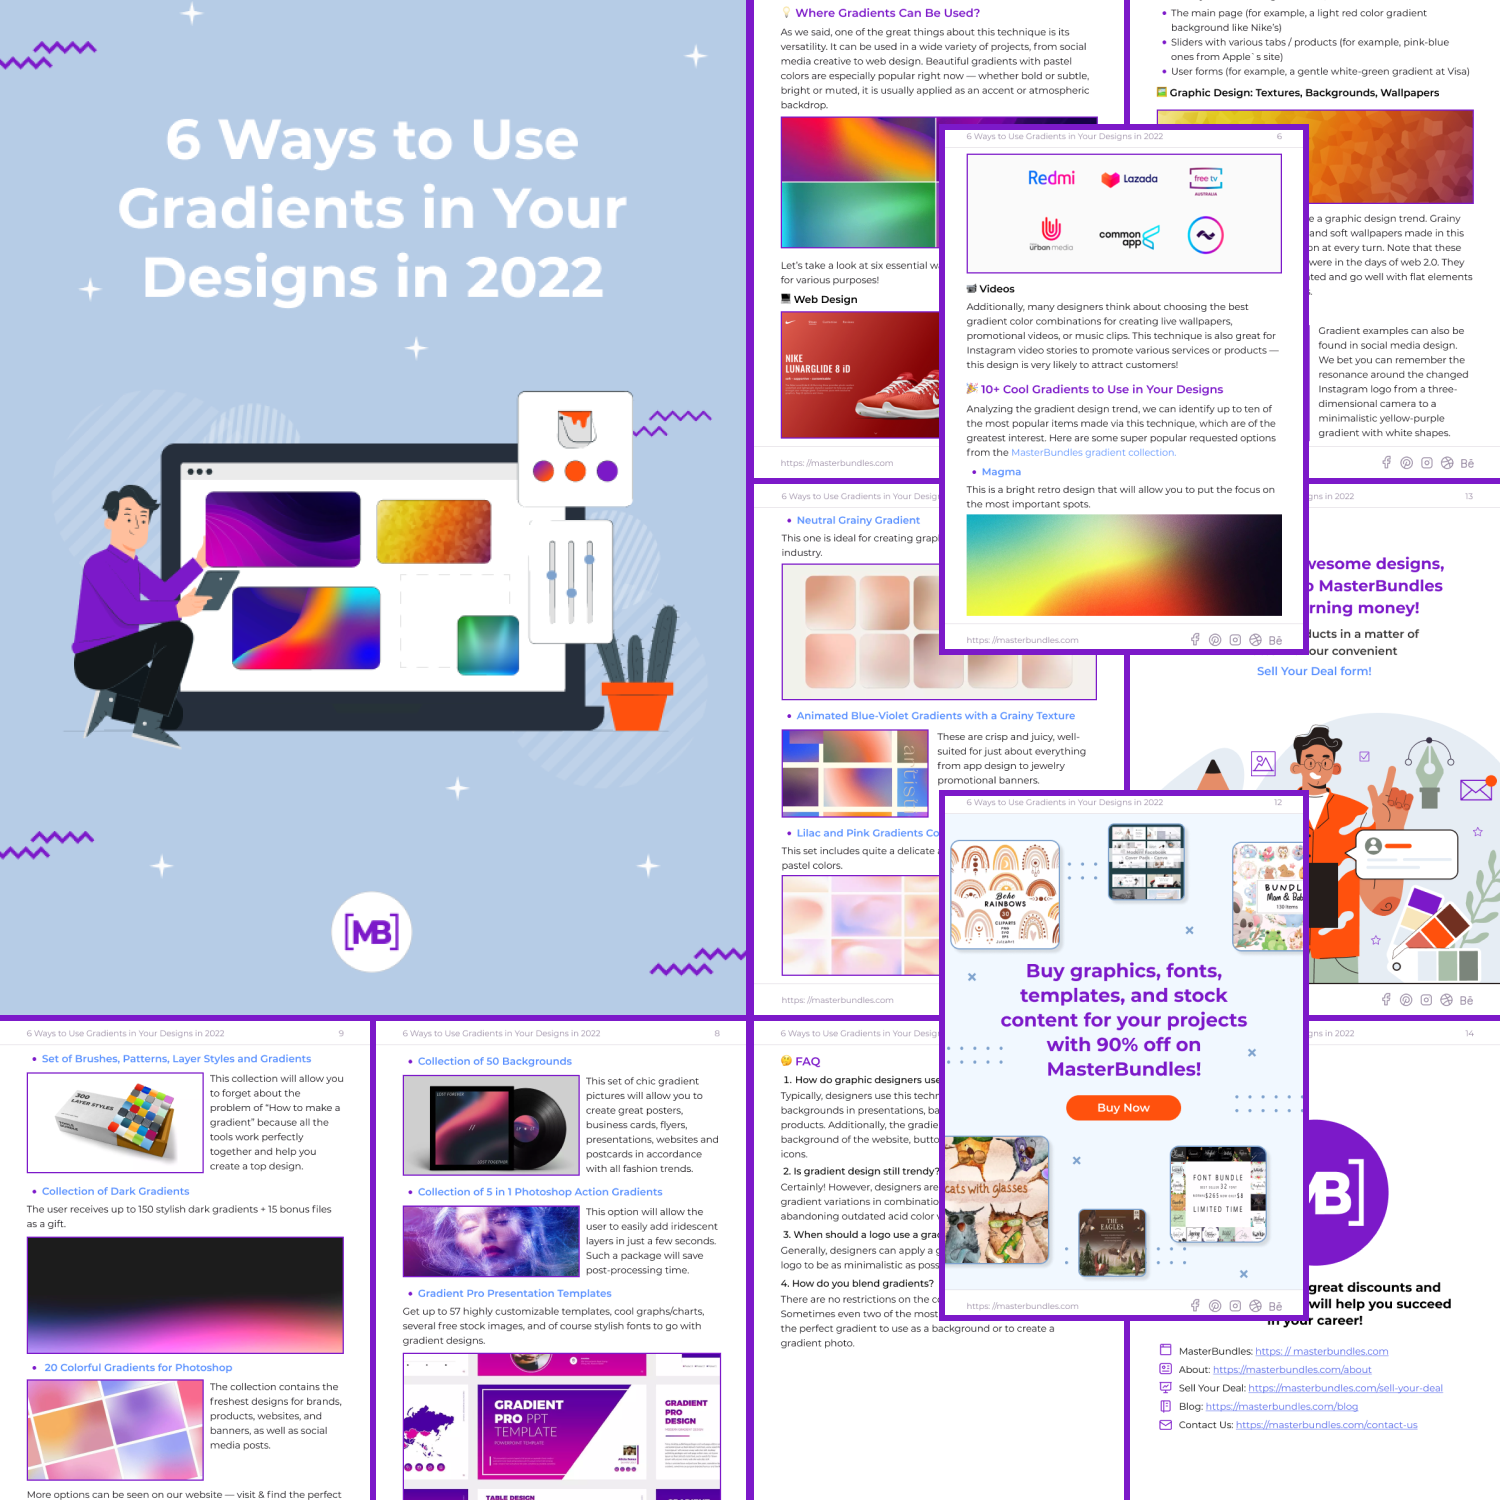 2 6 ways to use gradients in your designs in 2022.